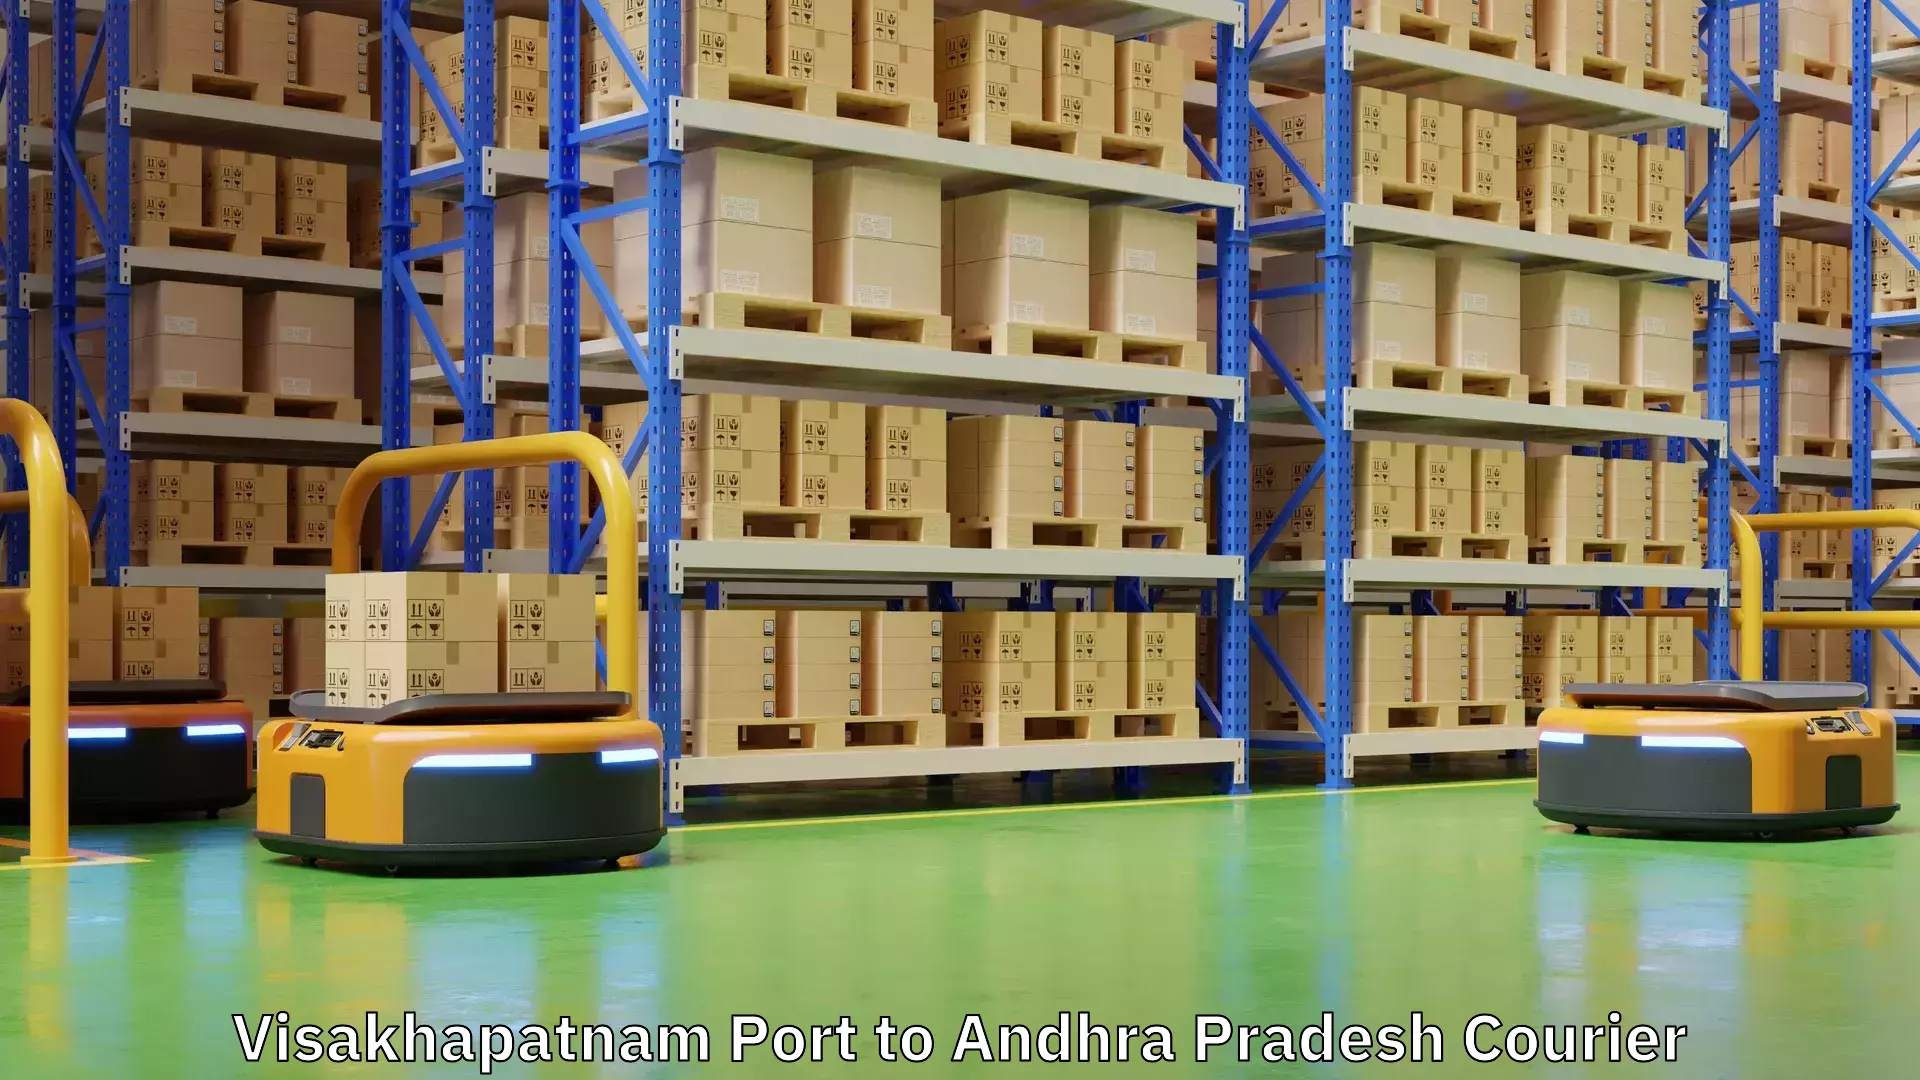 Same-day delivery solutions Visakhapatnam Port to Andhra Pradesh